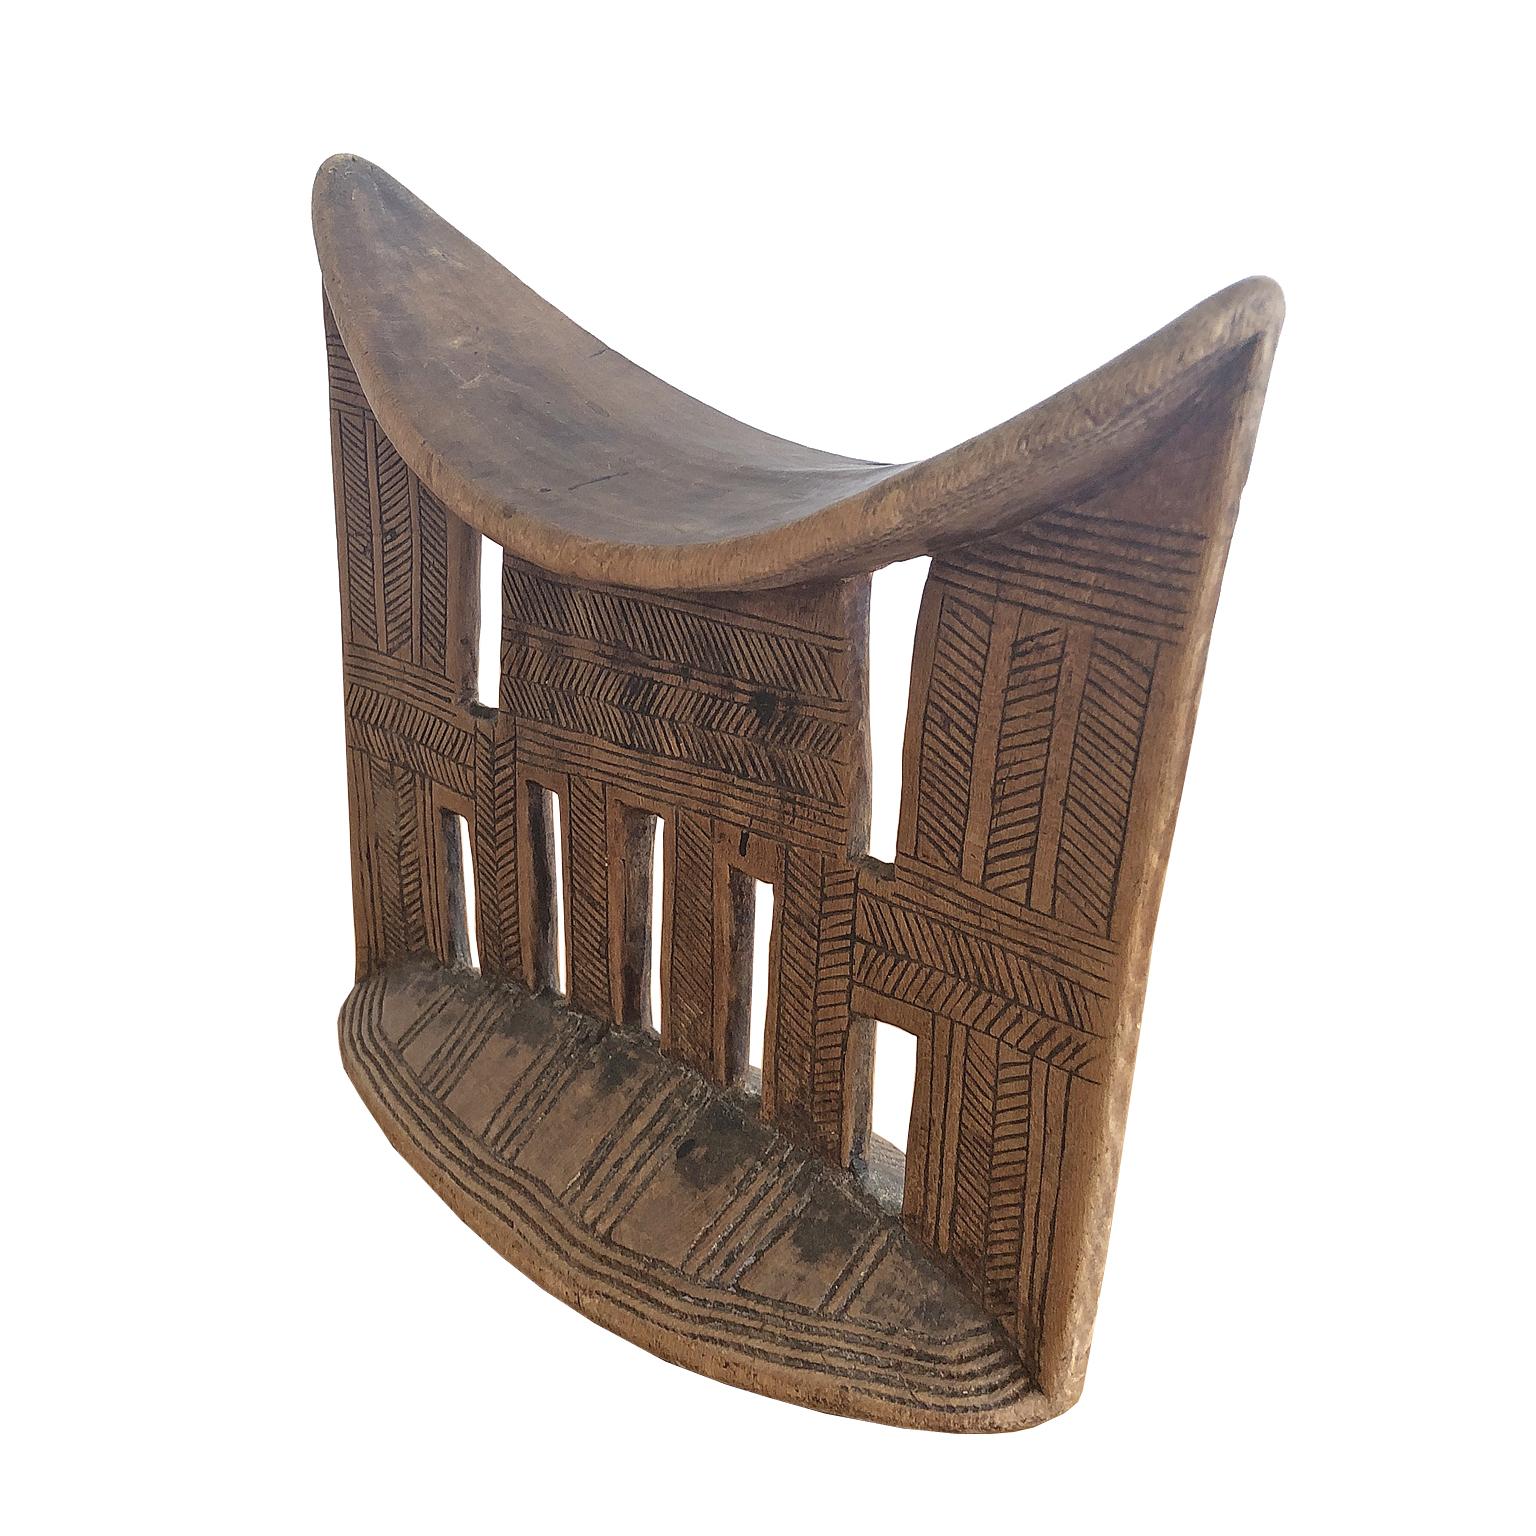 Hand-Carved African Tribal Headrest in Carved Wood from the Sidama People of Ethiopia